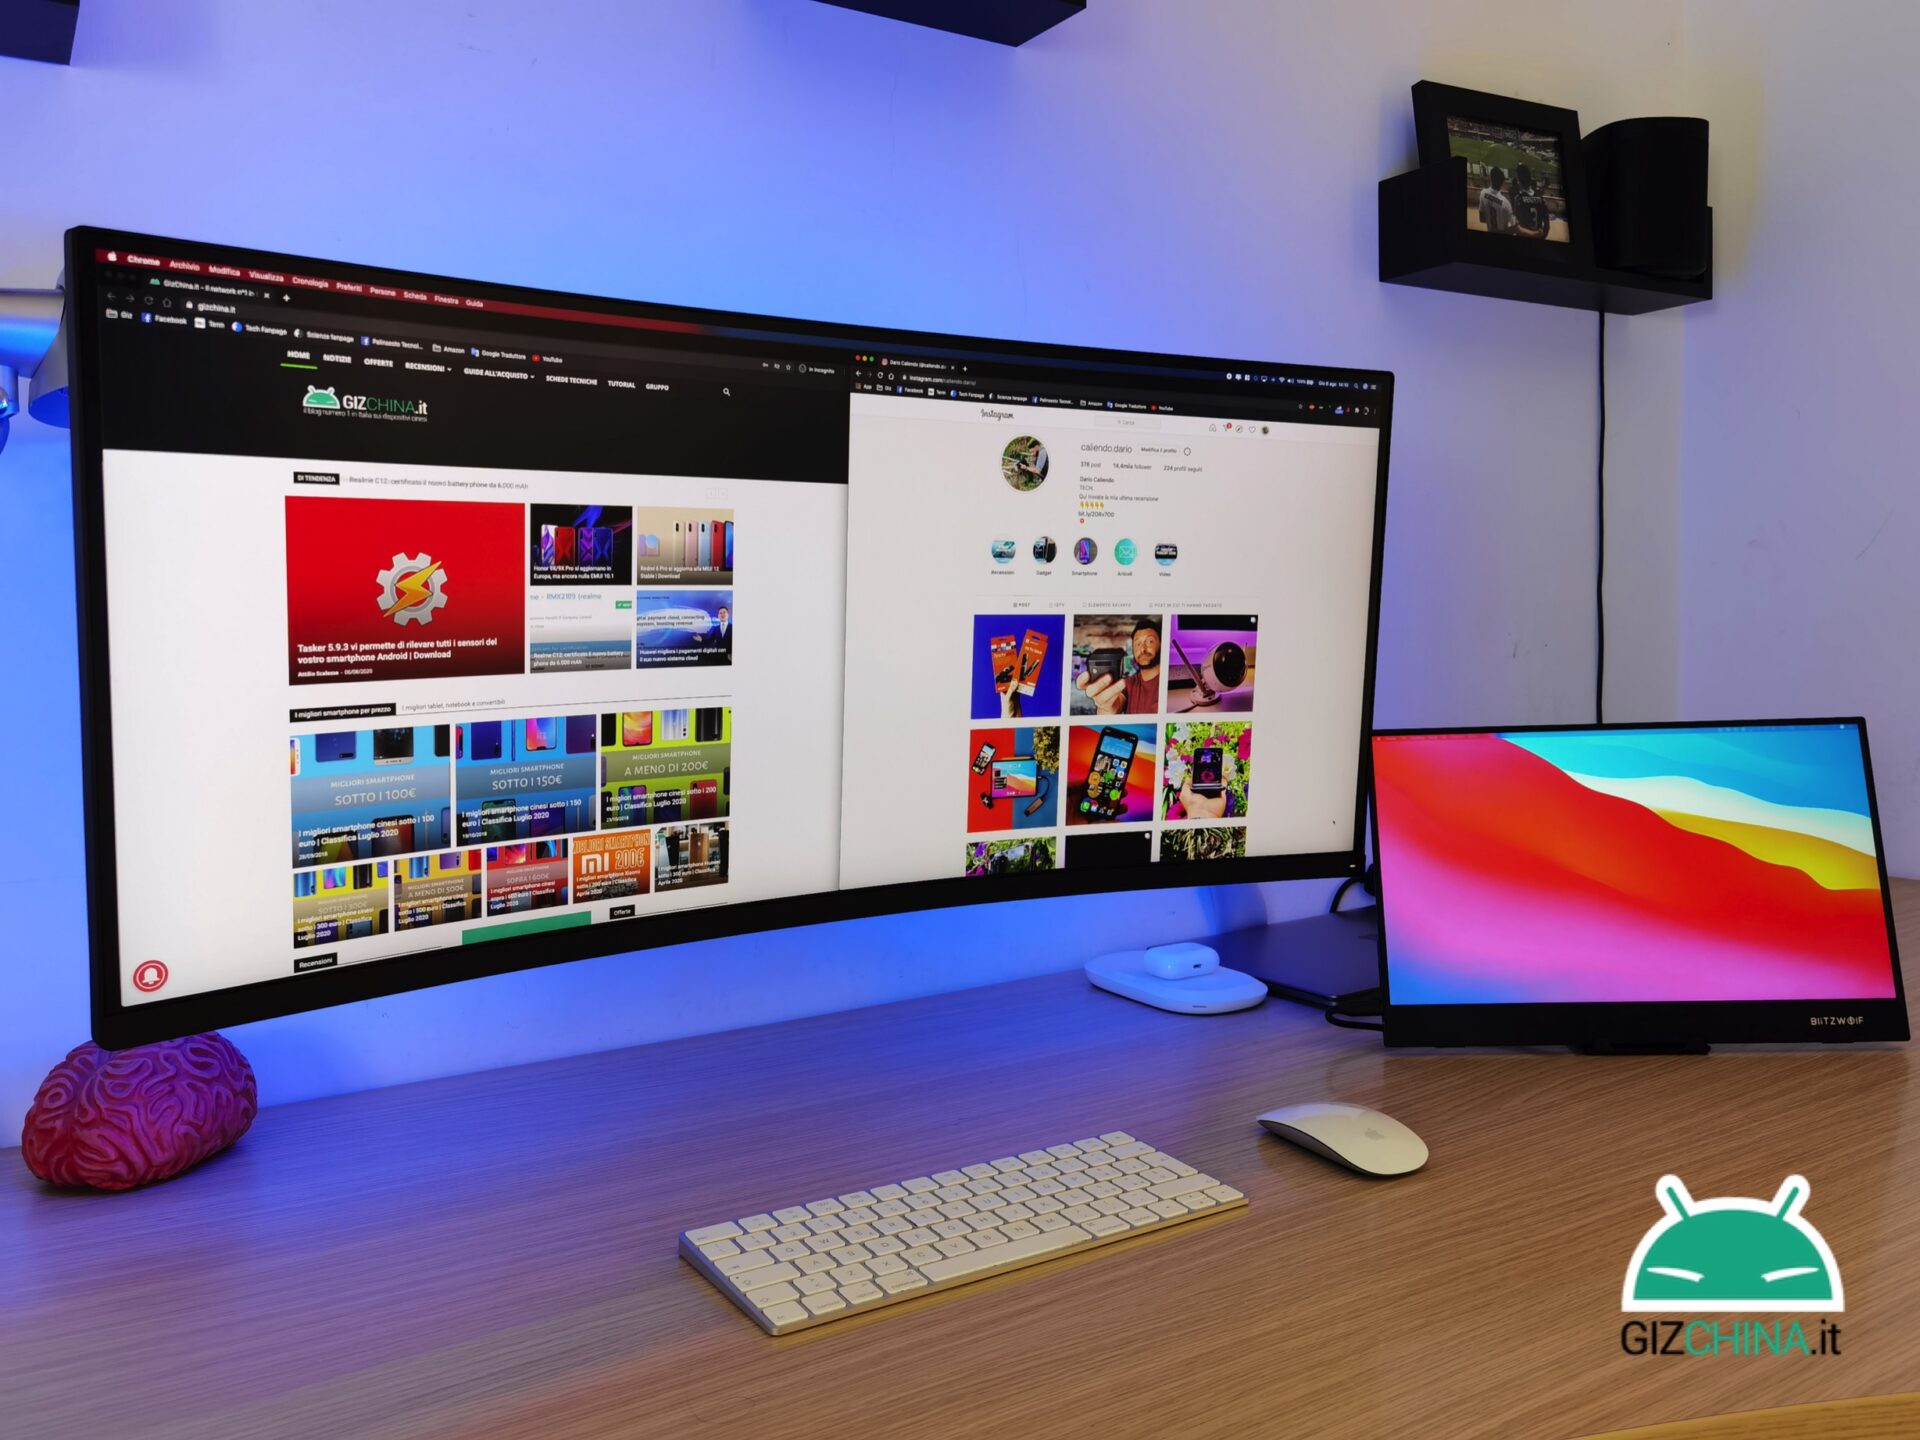 Xiaomi Mi C   urved Gaming Monitor 34 review: features, quality and price